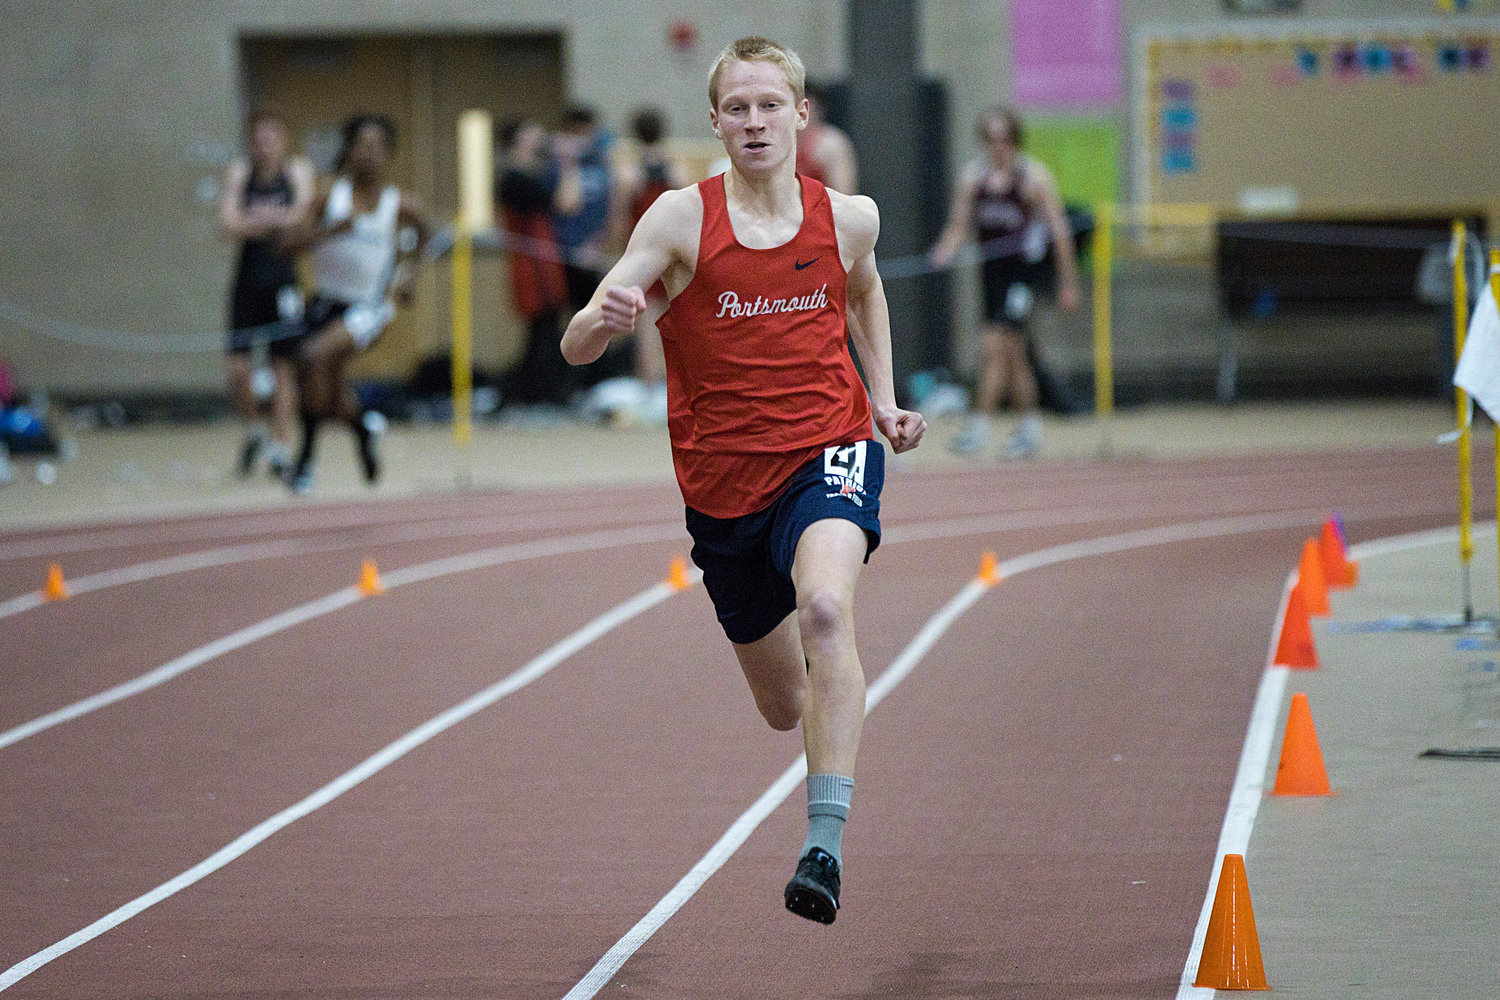 Nate DeConto speeds around the track while competing in the 300-meter race.